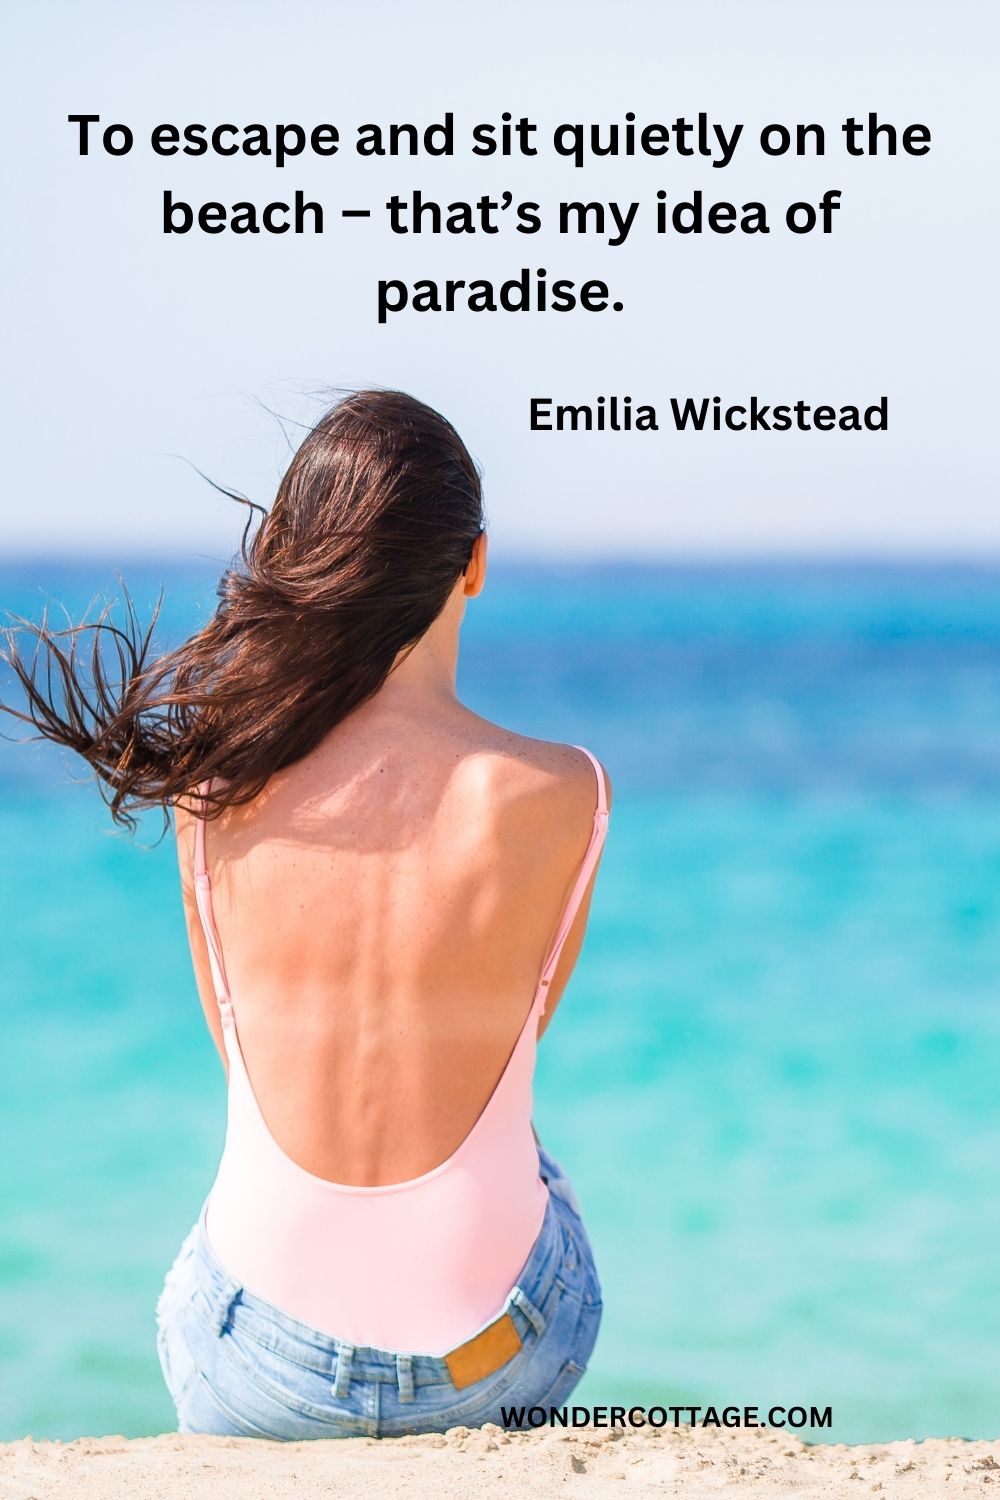 To escape and sit quietly on the beach – that’s my idea of paradise. Emilia Wickstead